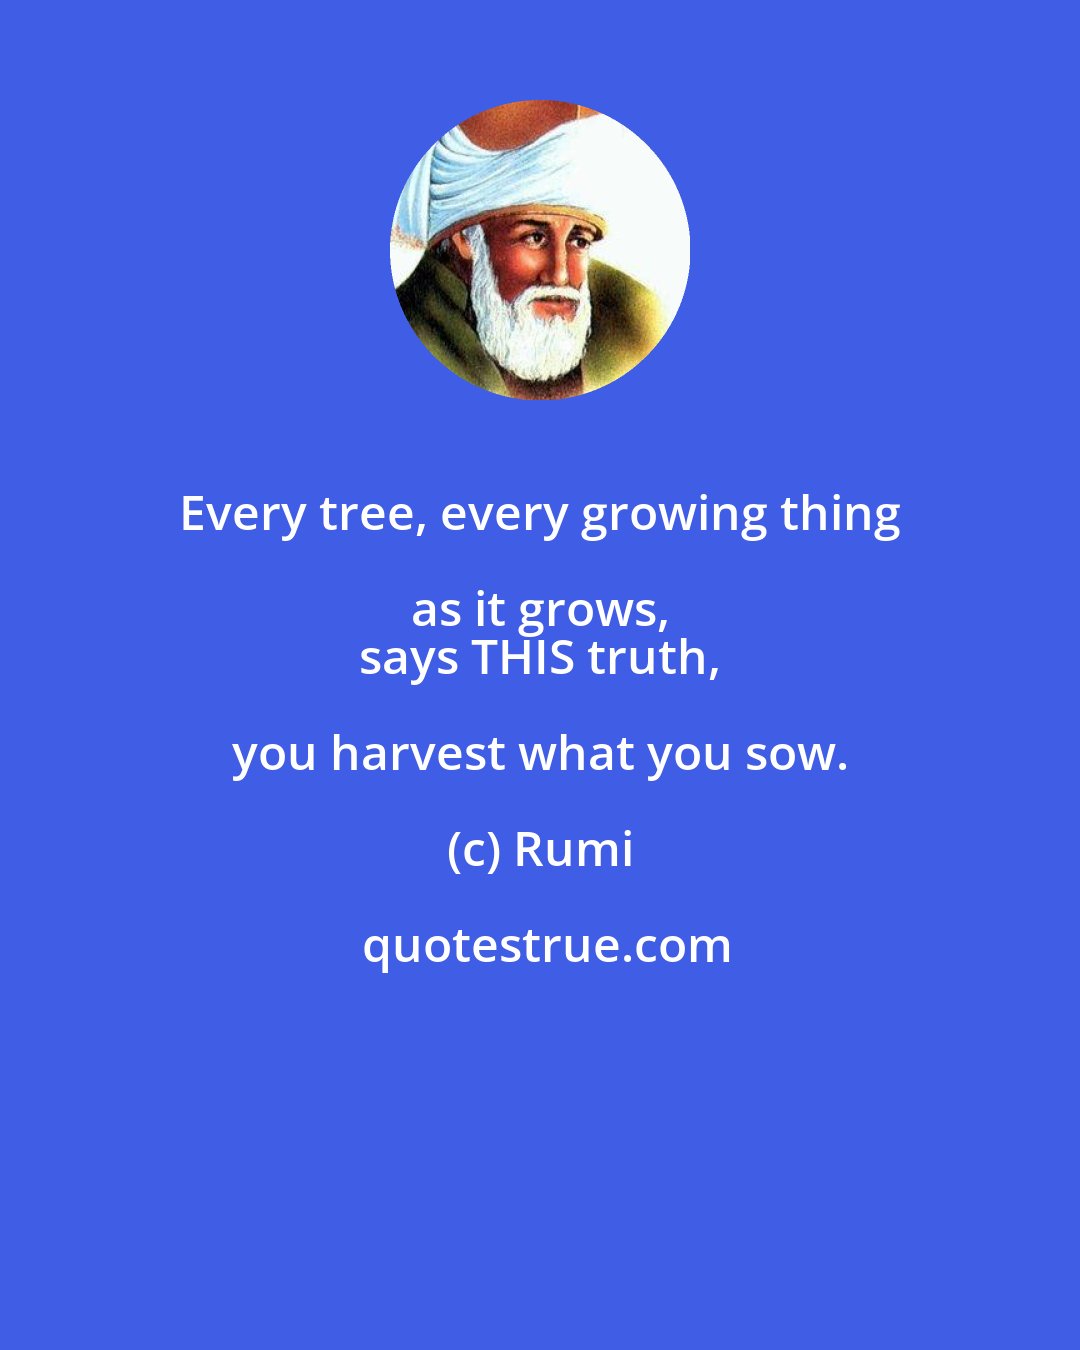 Rumi: Every tree, every growing thing as it grows, 
 says THIS truth, you harvest what you sow.